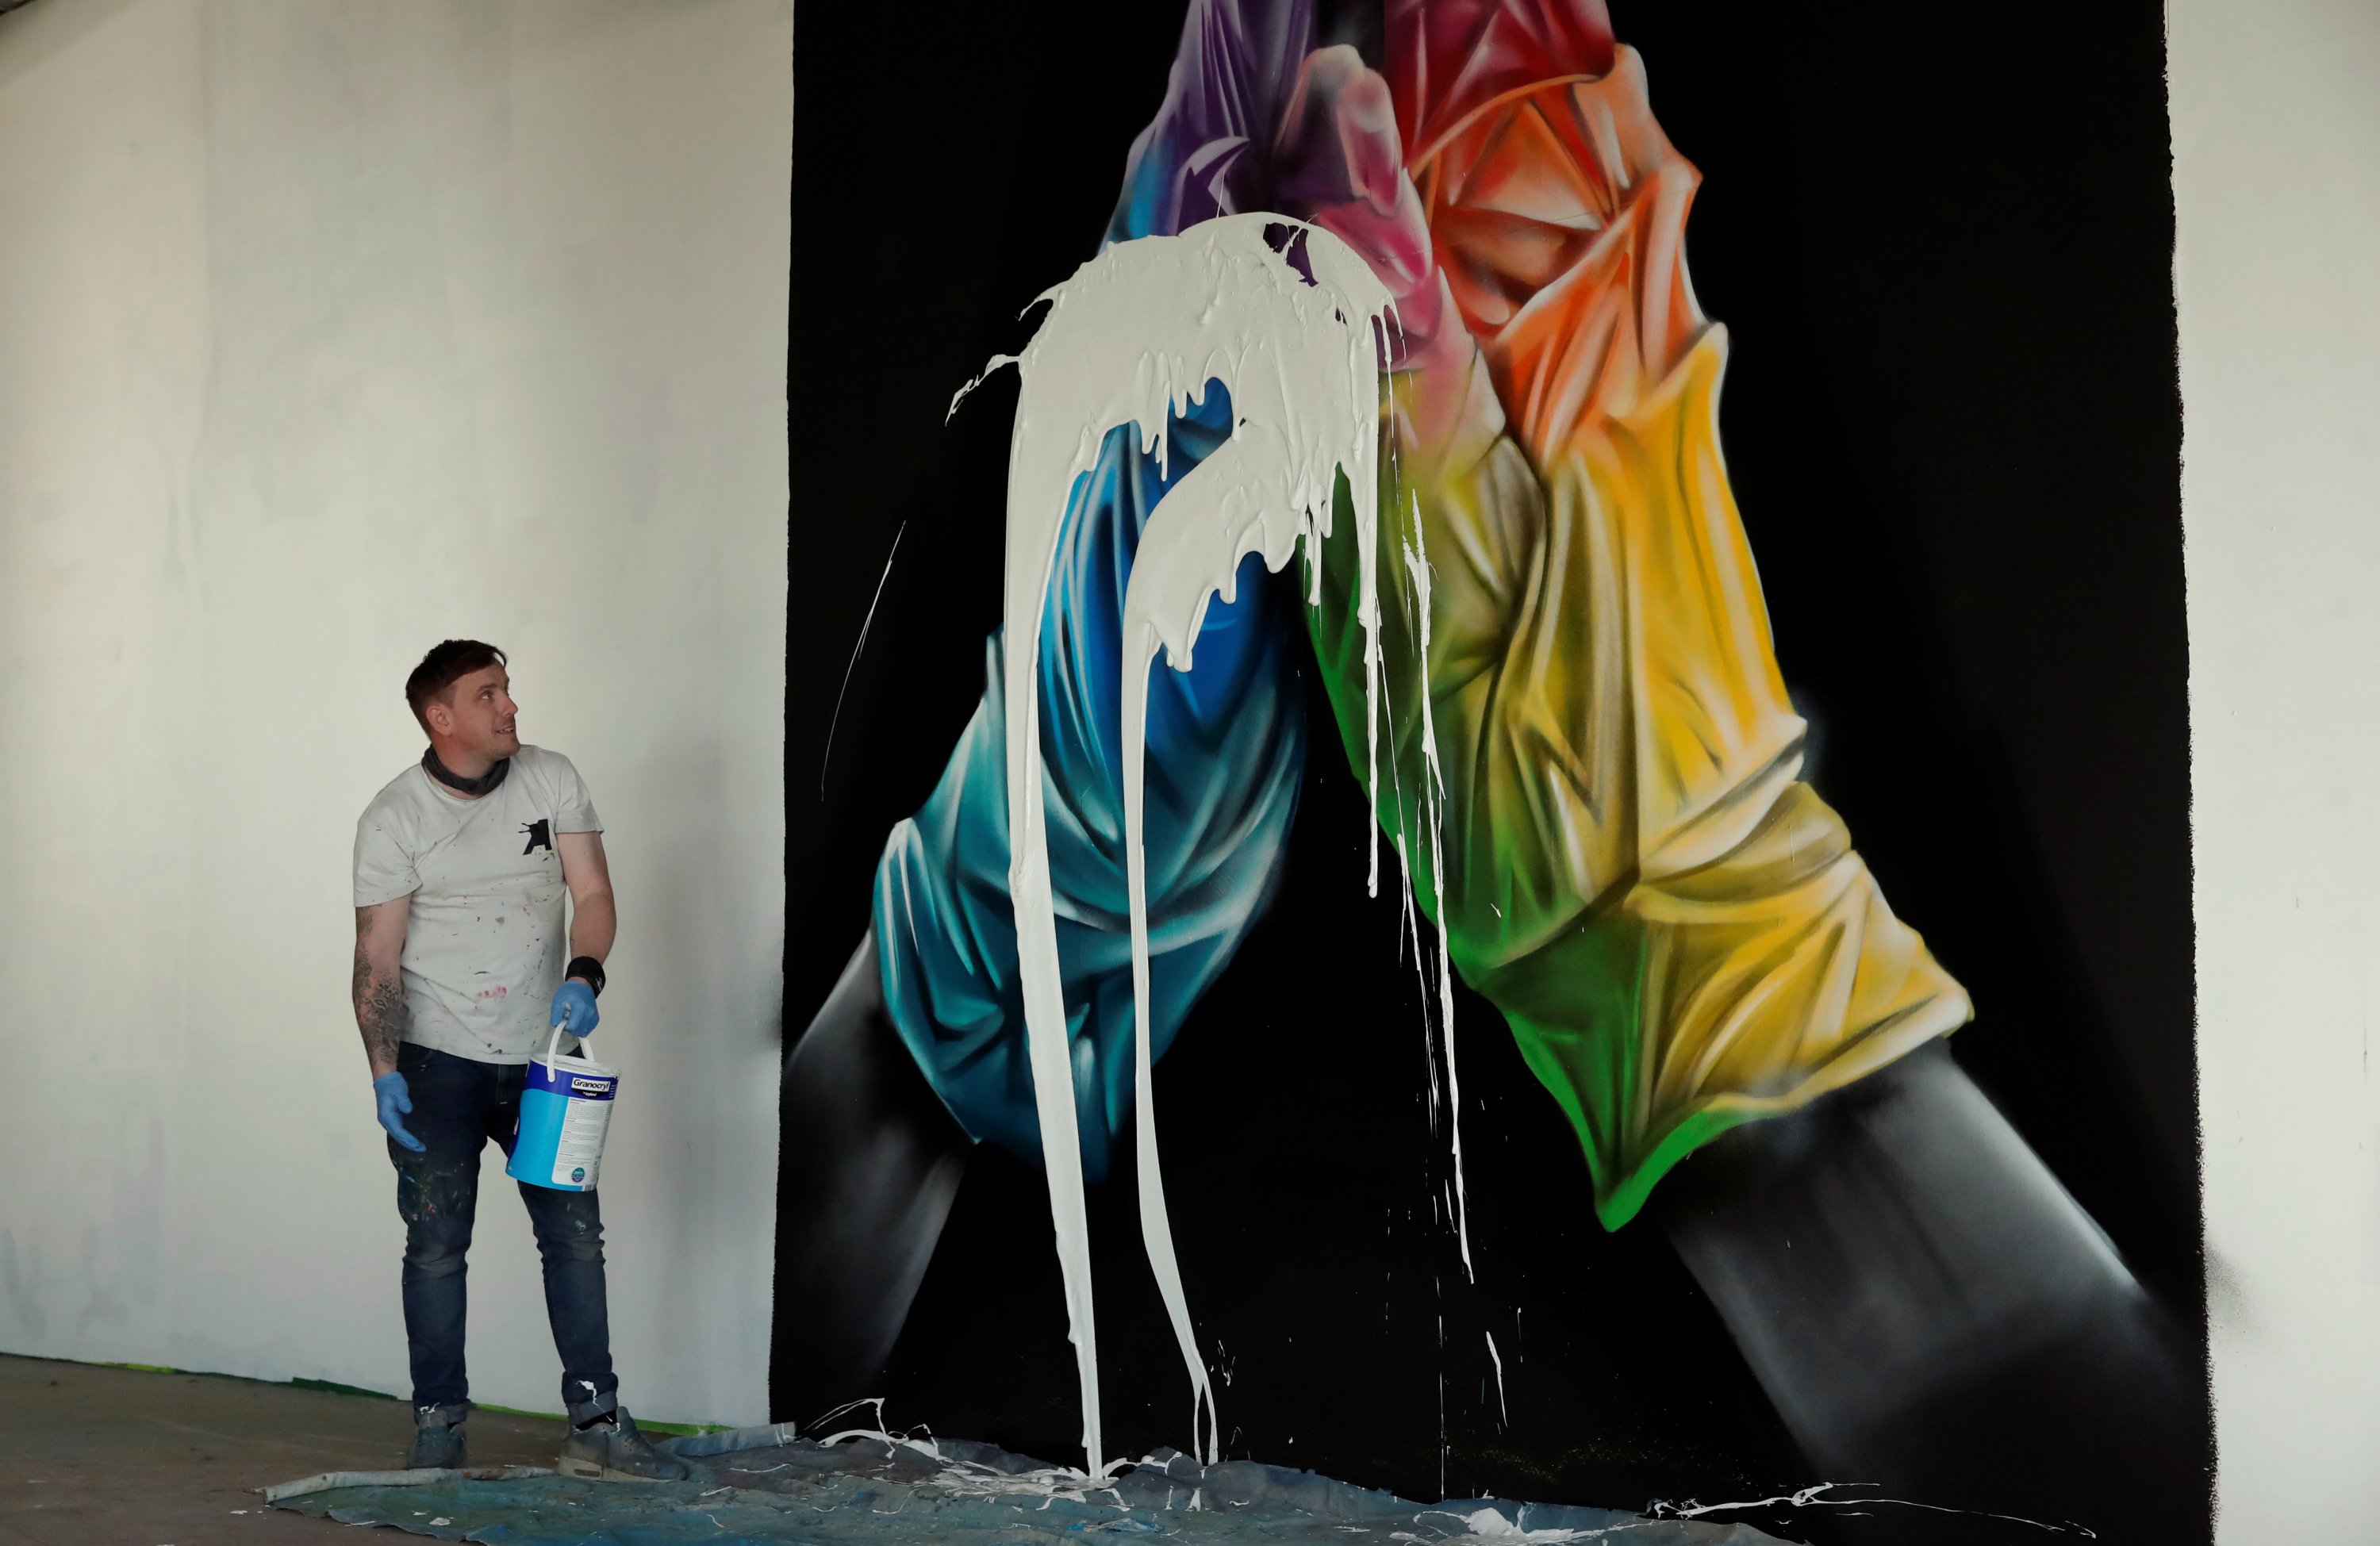 Artist to release NFT, print version of mural that he destroyed